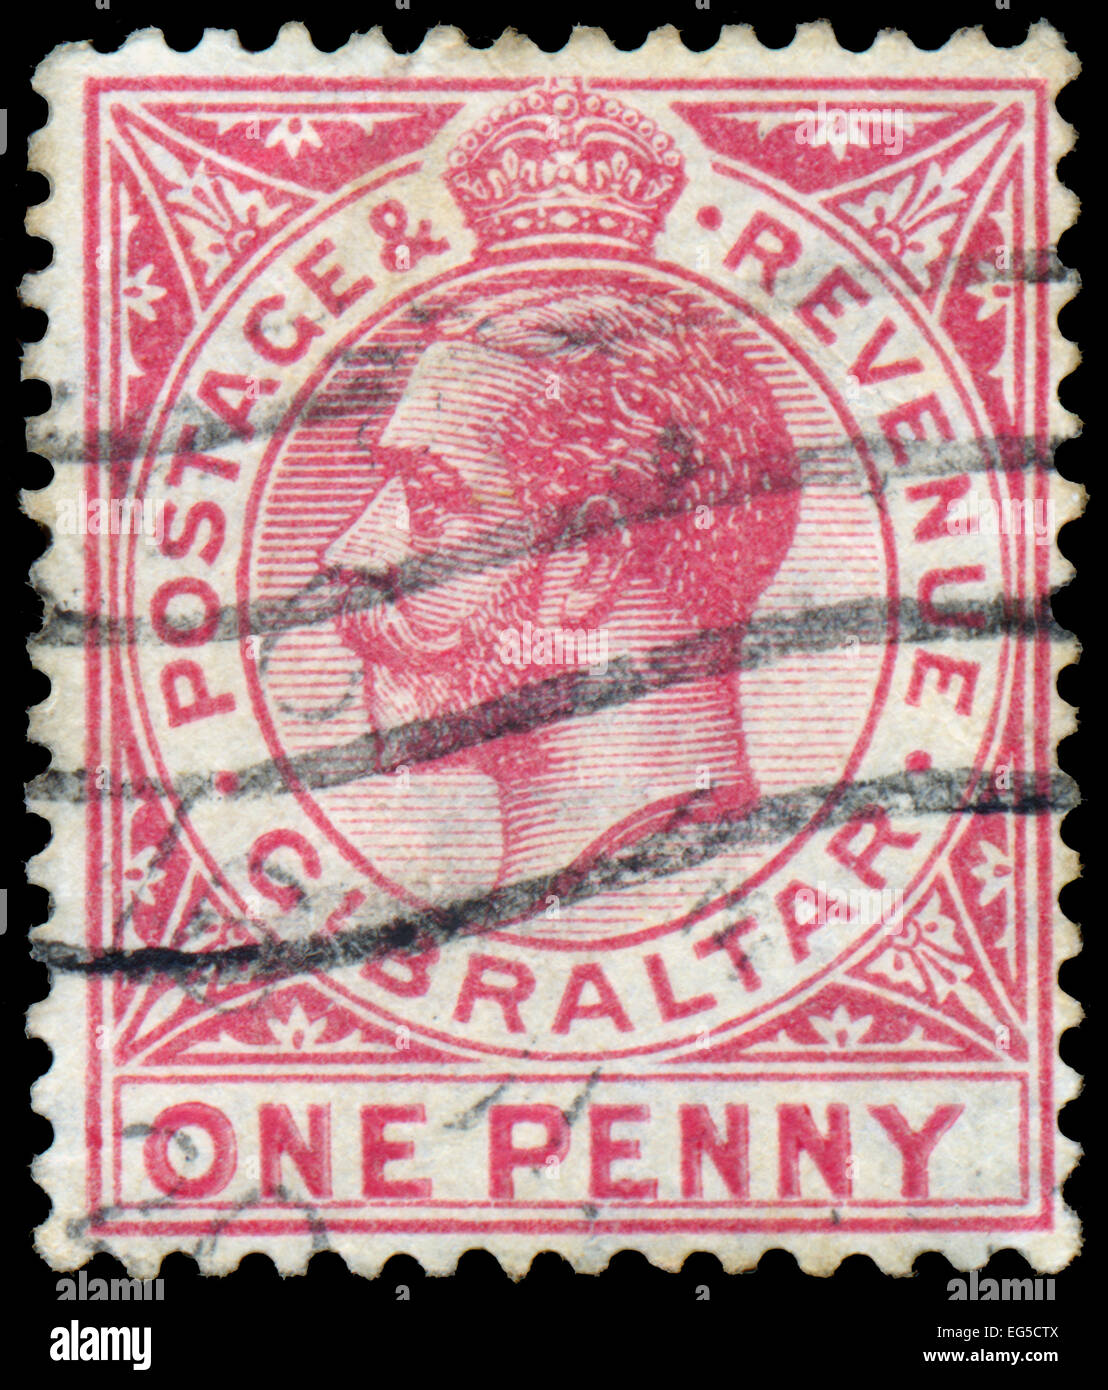 GIBRALTAR - CIRCA 1912: A stamp printed in GIBRALTAR shows image of the George V was King of the United Kingdom and the Dominion Stock Photo